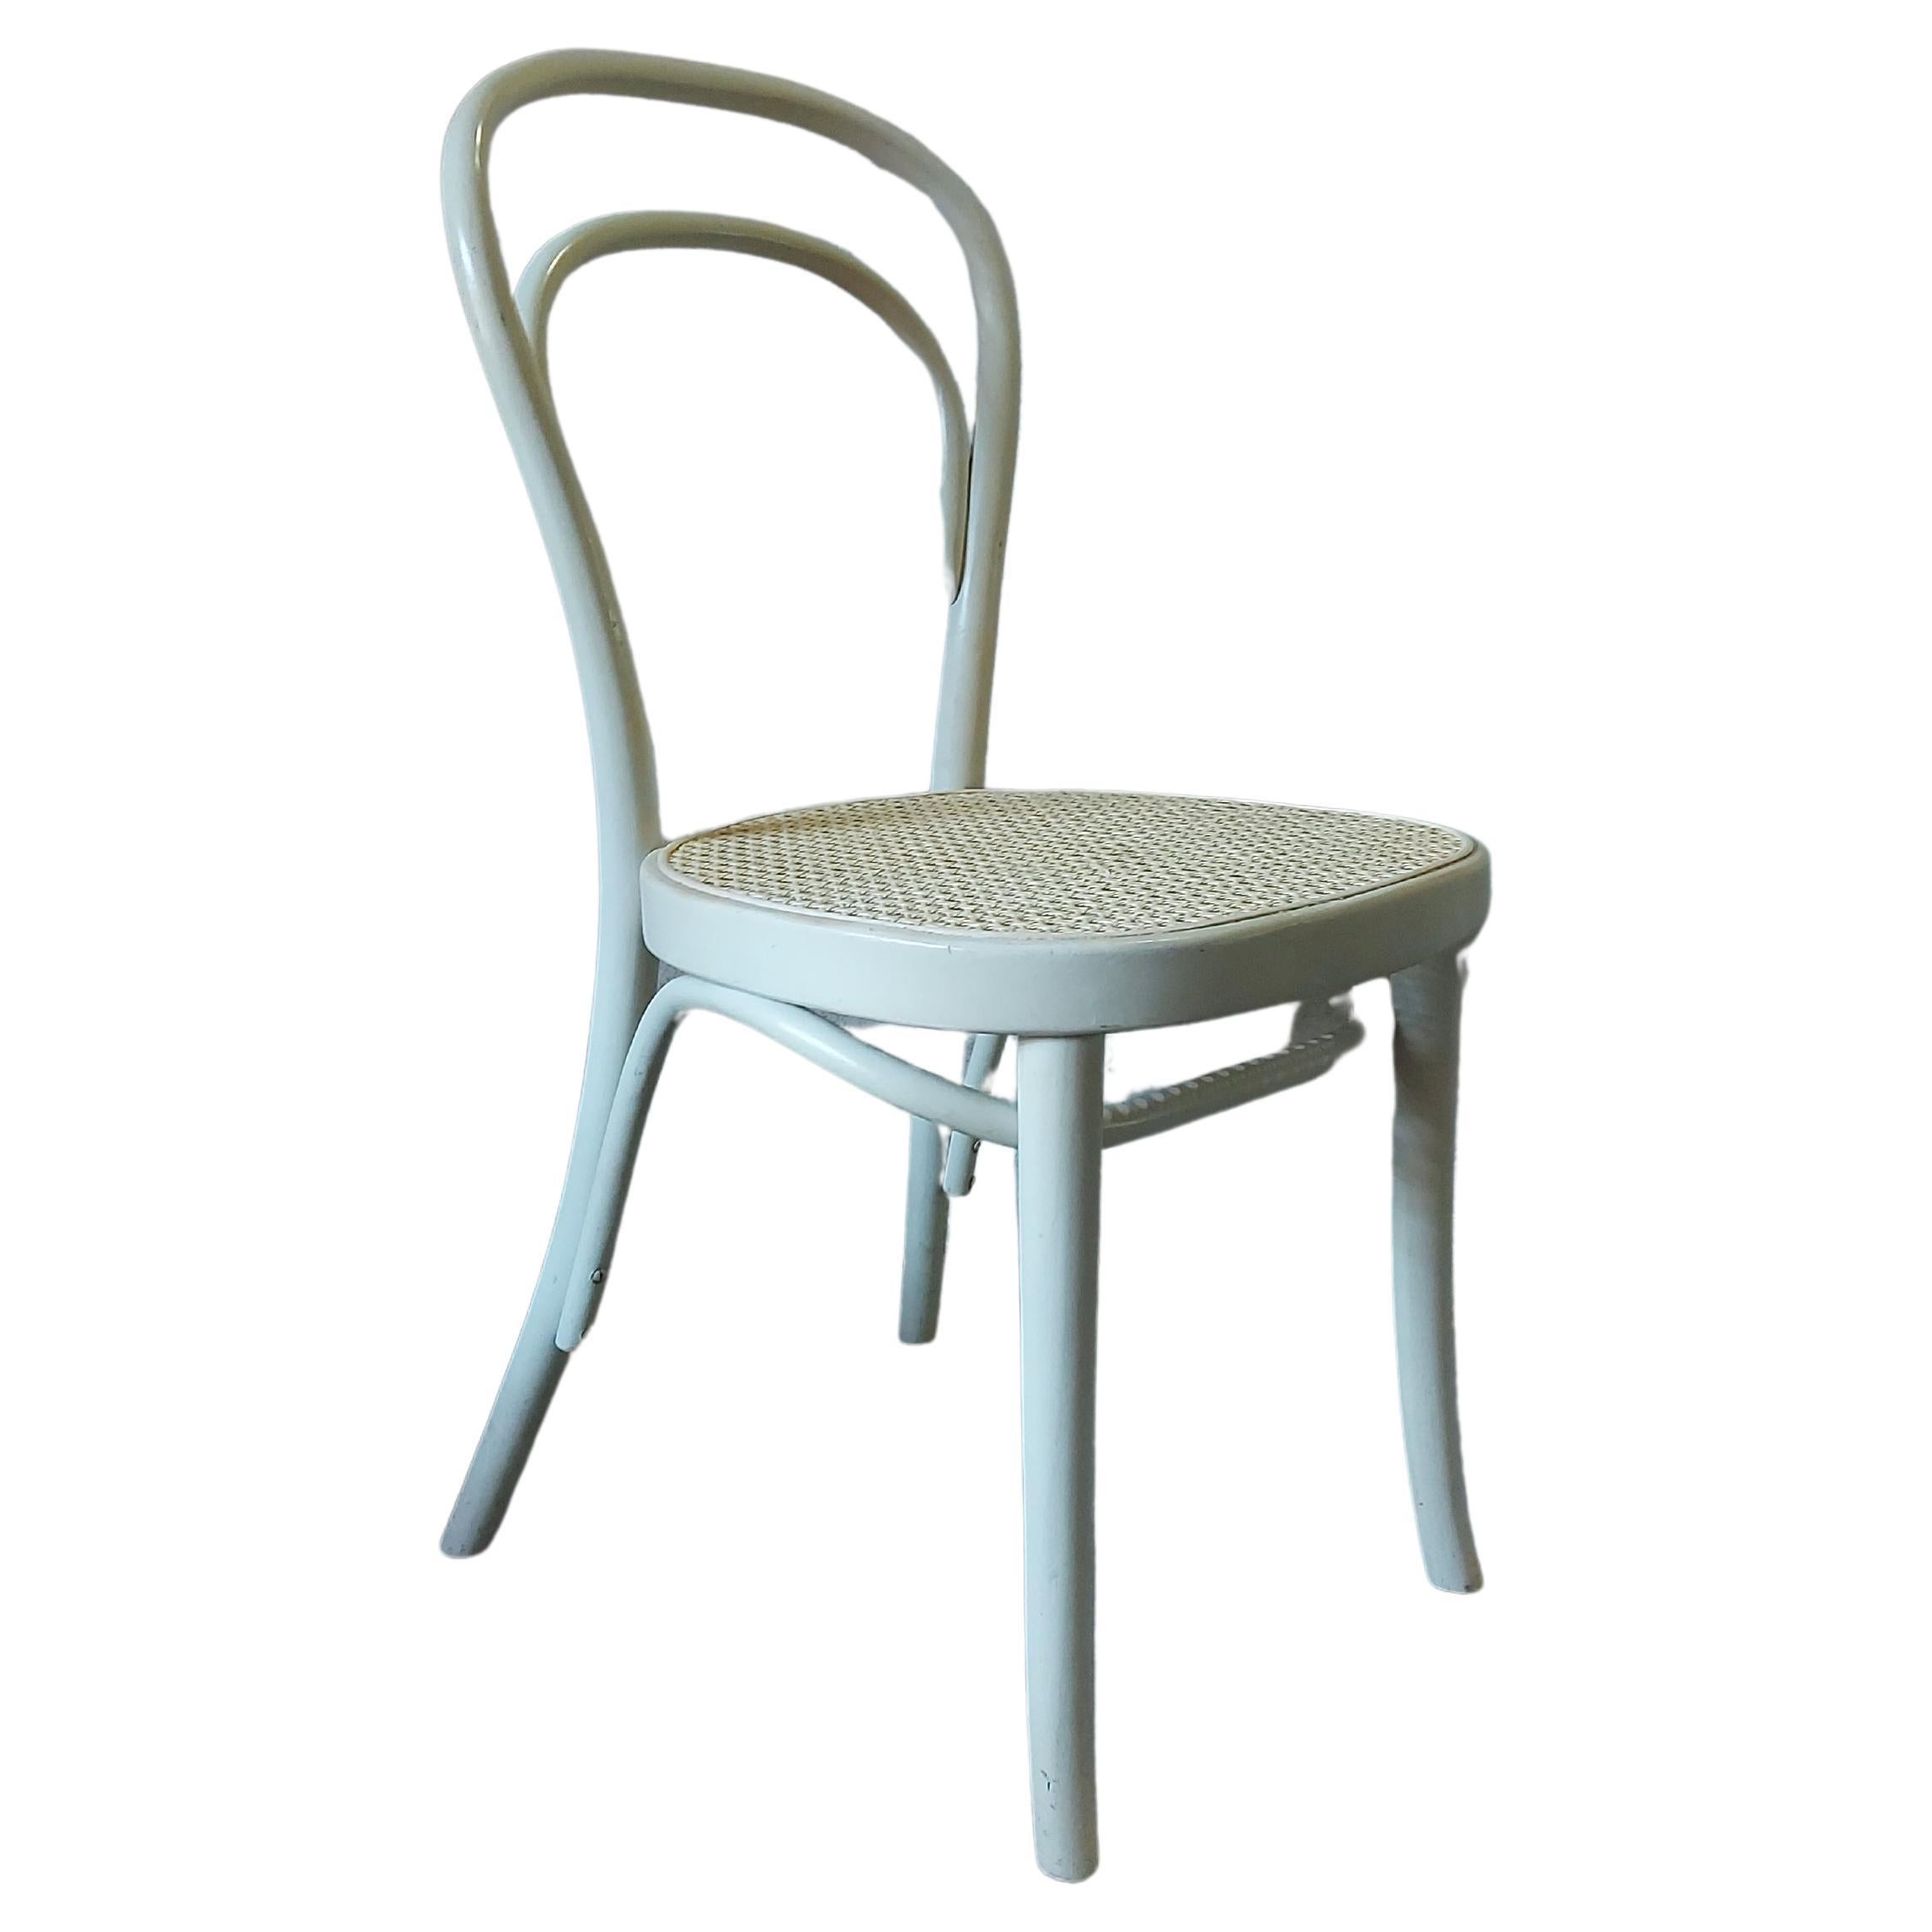 Bentwood No. 14 dining chair